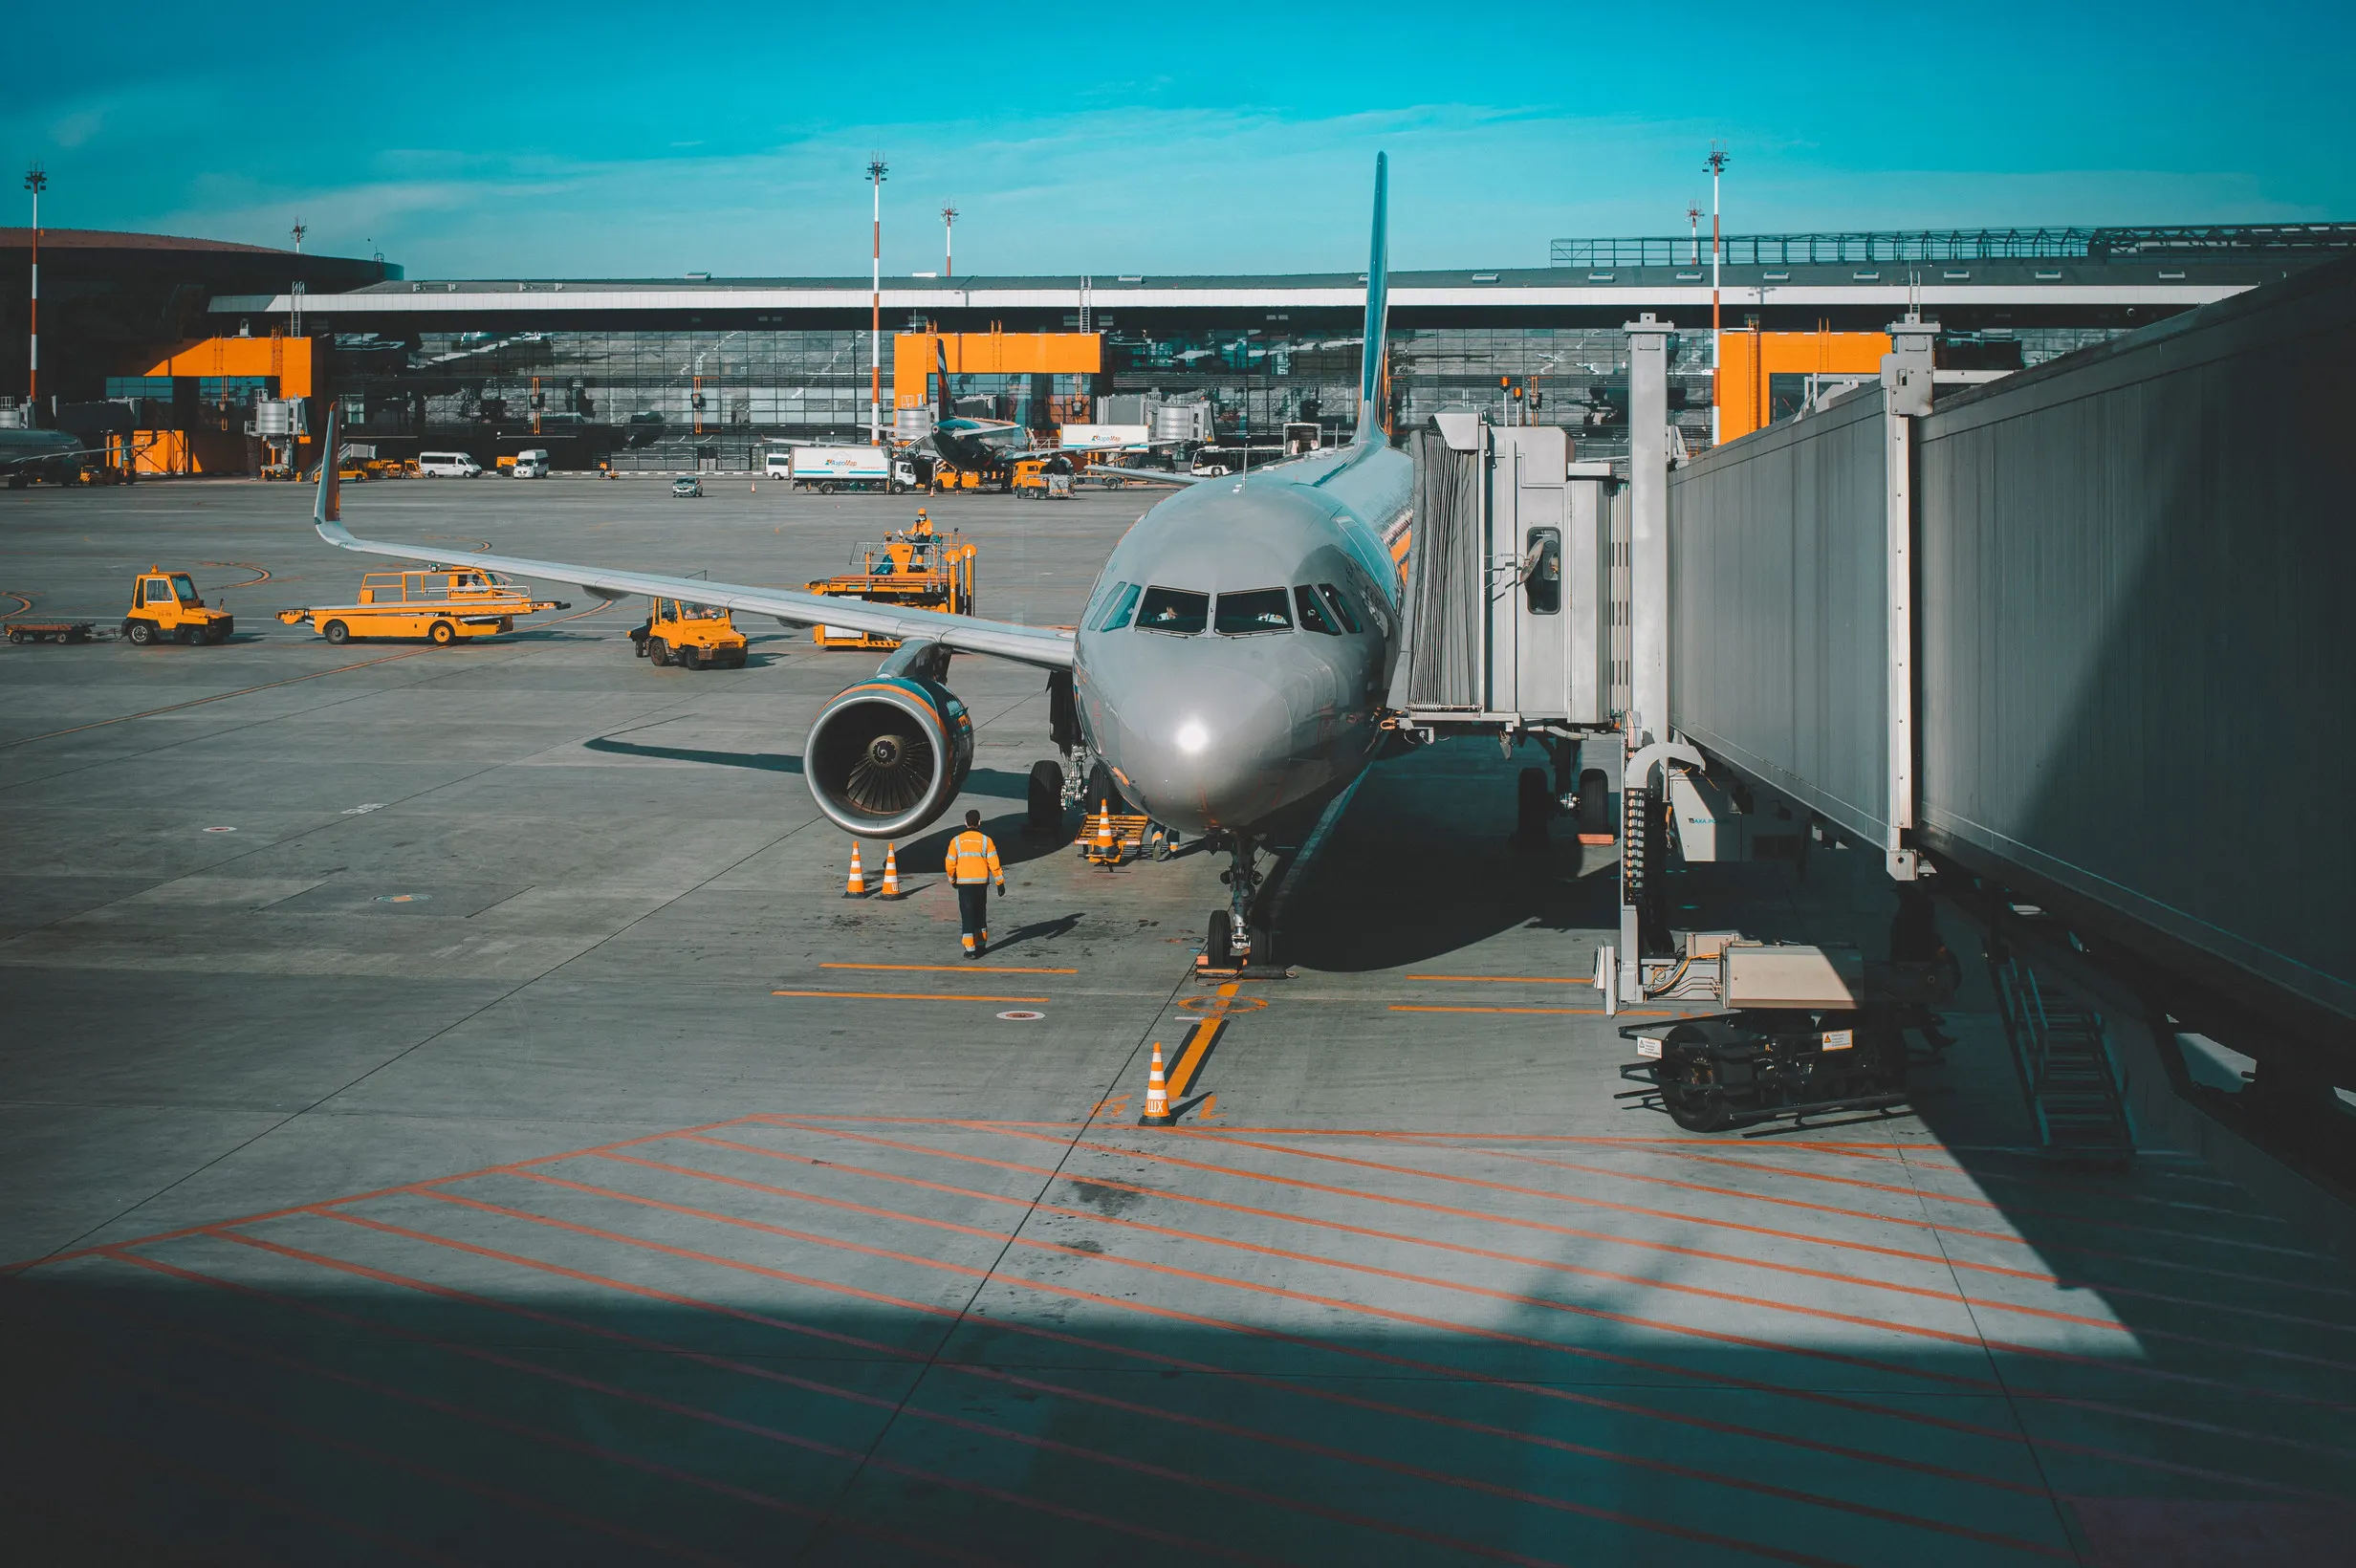 Airport in Moscow, Source: Photo by Egor Myznik on Unsplash